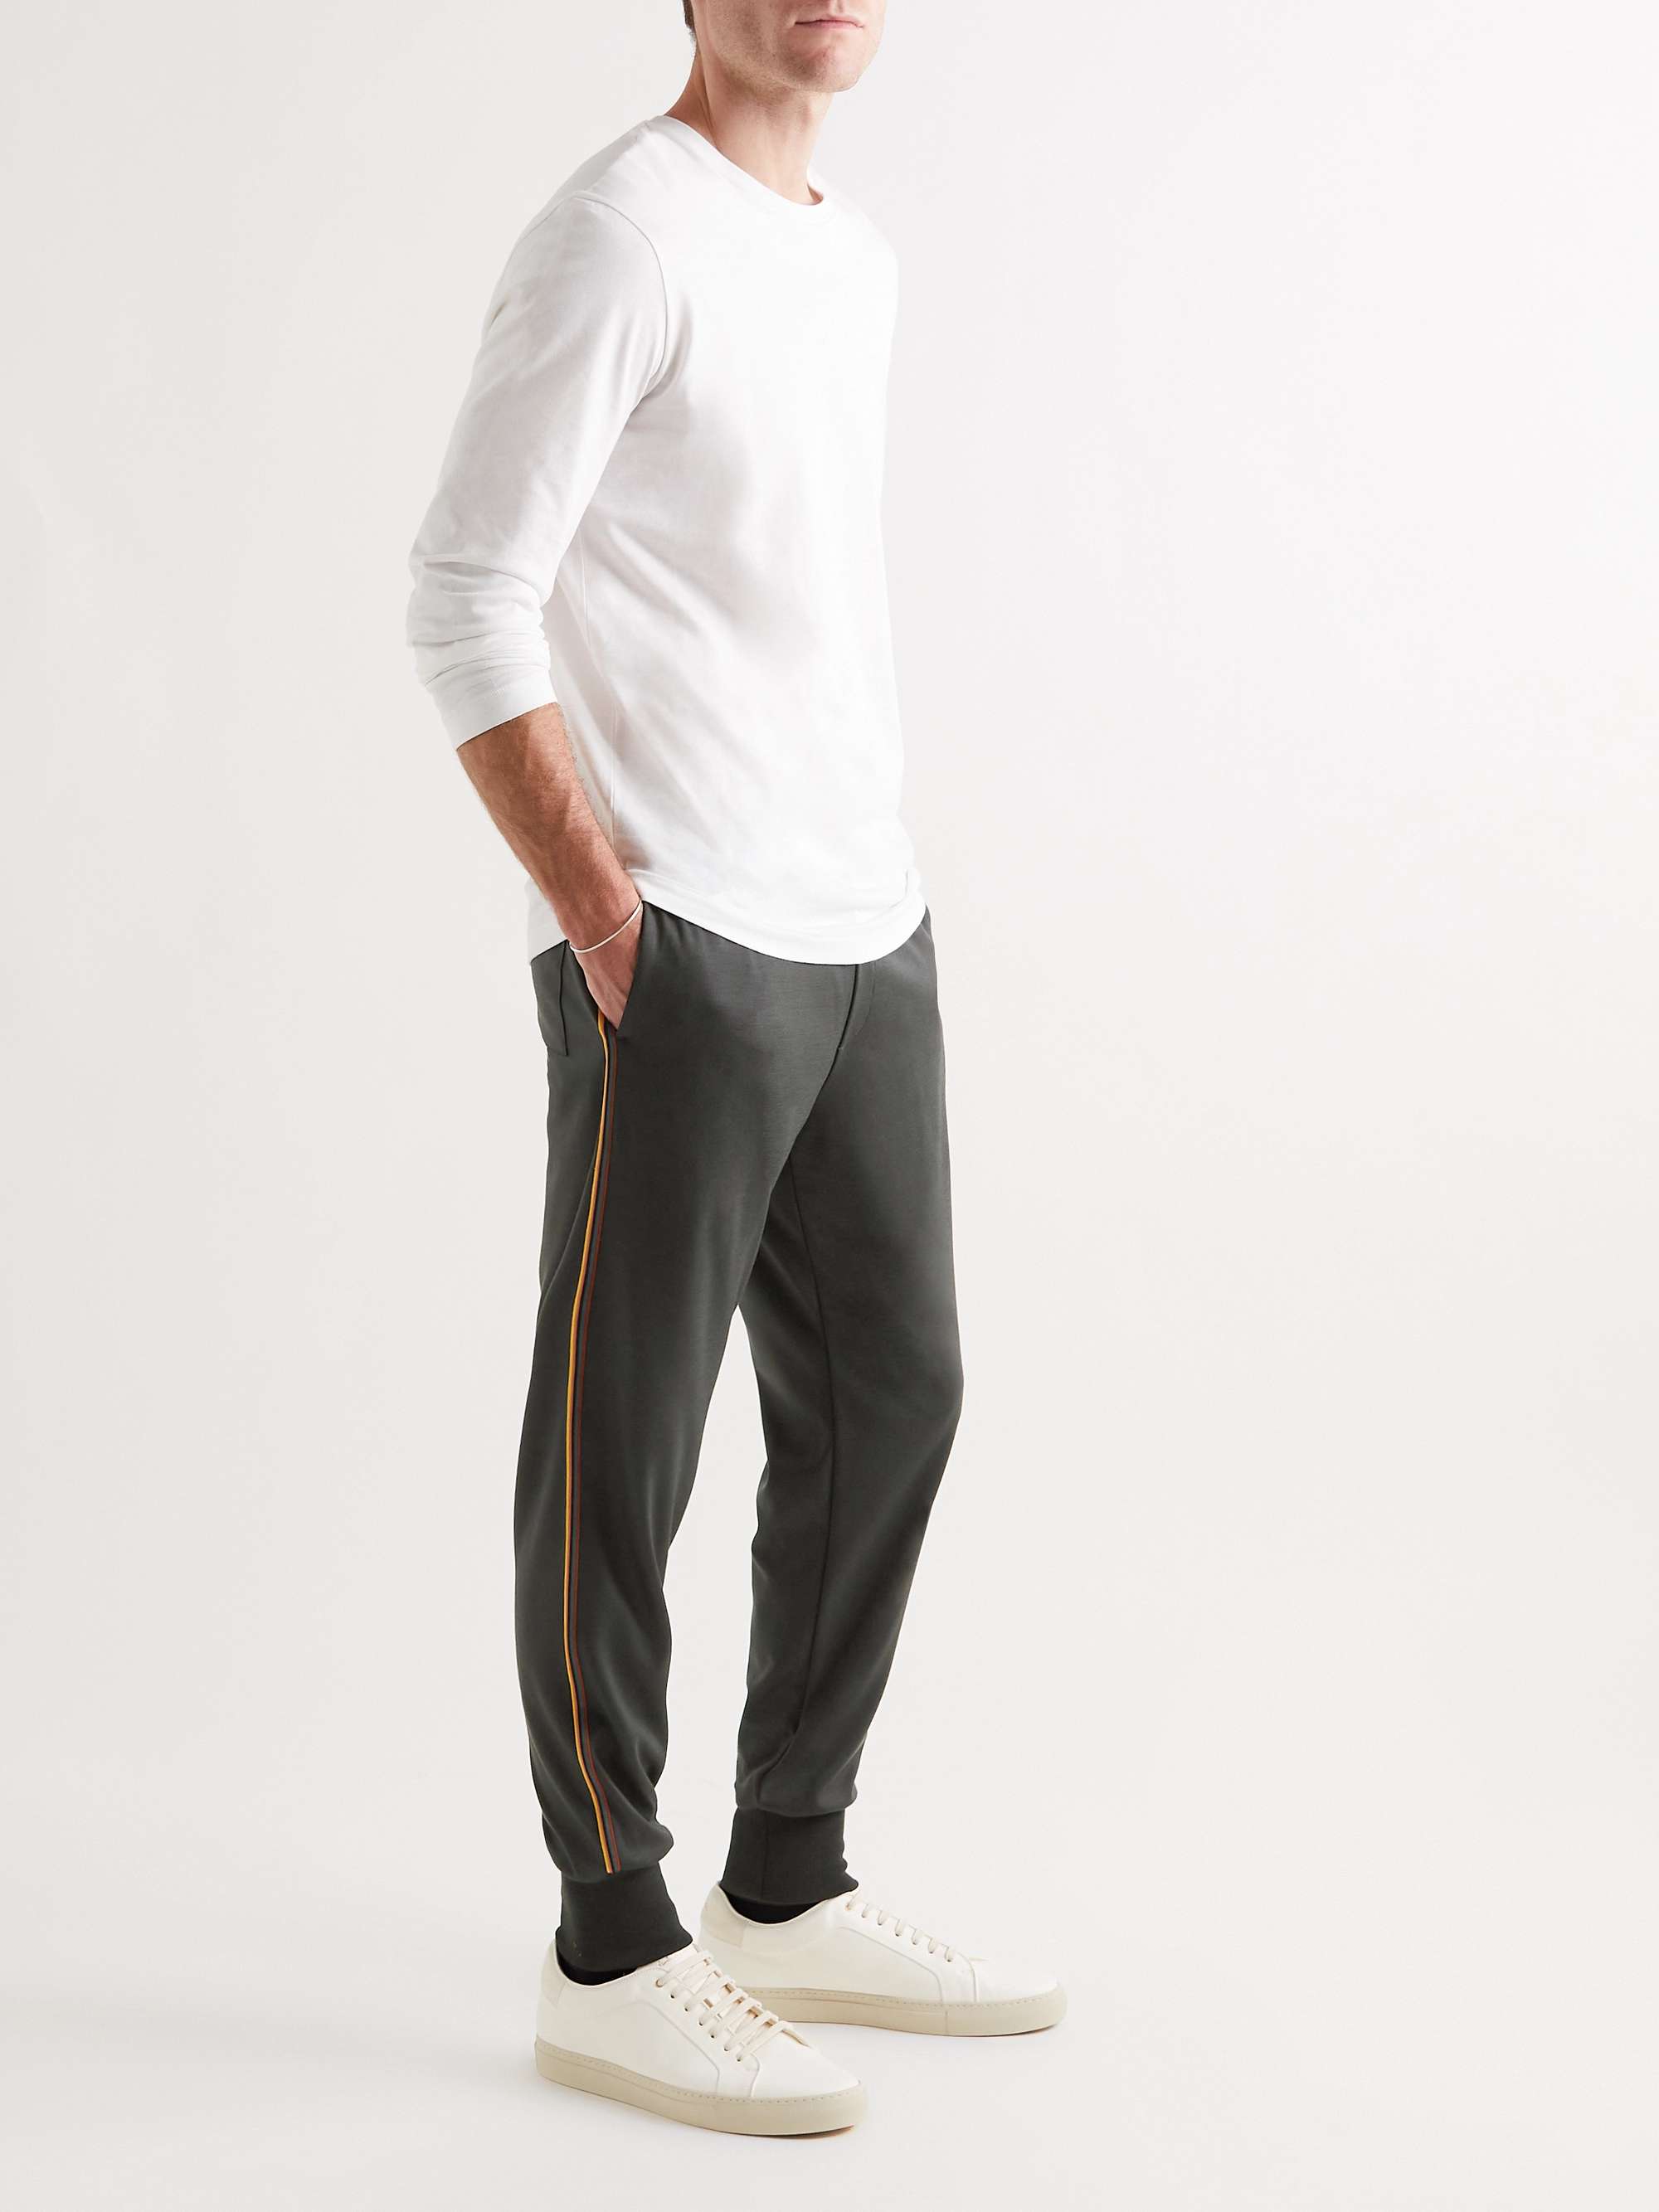 PAUL SMITH Tapered Striped Webbing-Trimmed Wool Sweatpants